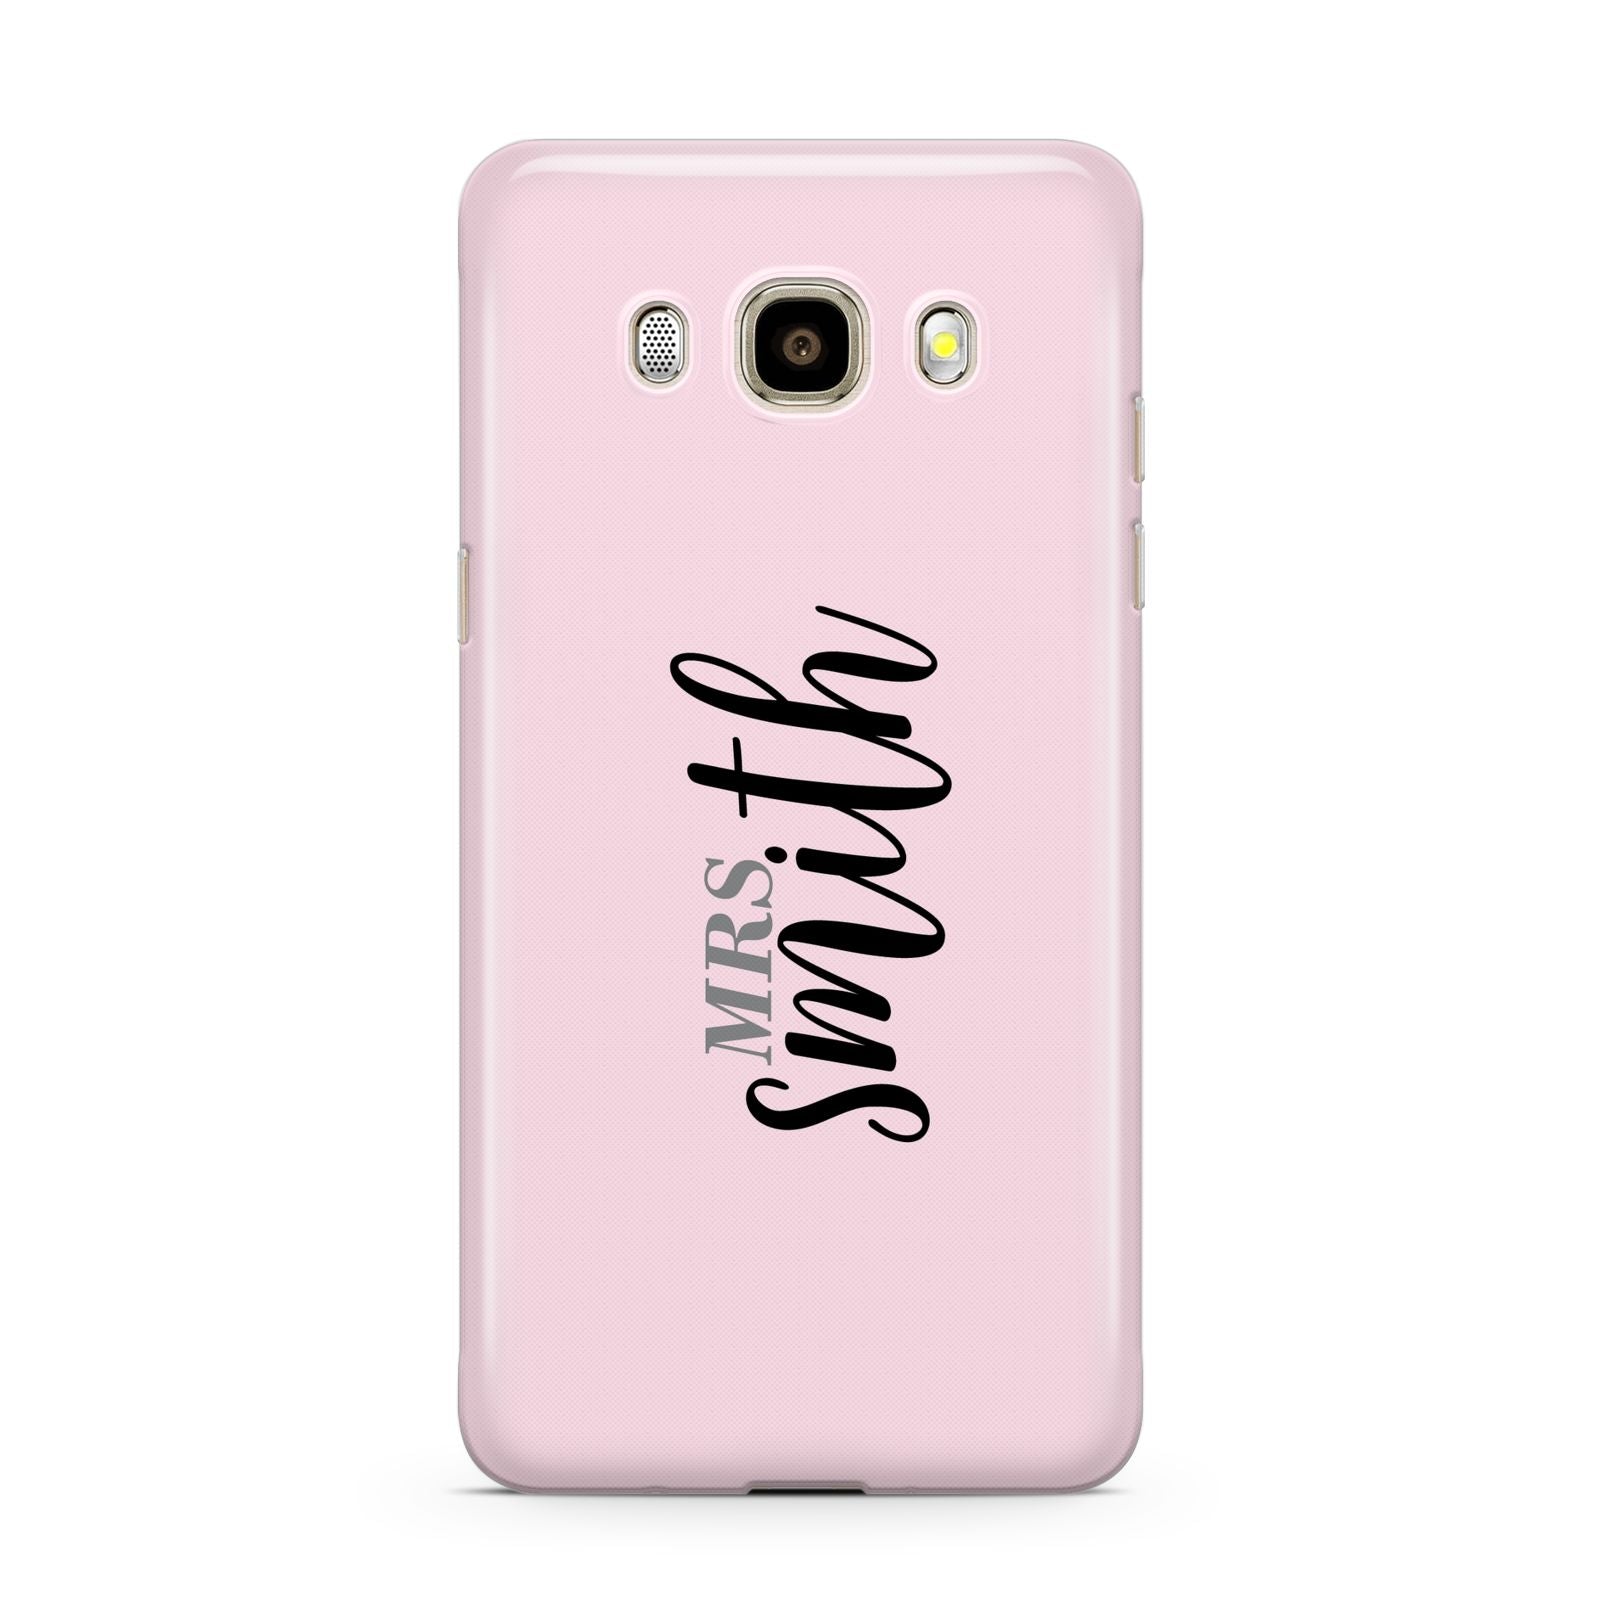 Personalised Bridal Samsung Galaxy J7 2016 Case on gold phone